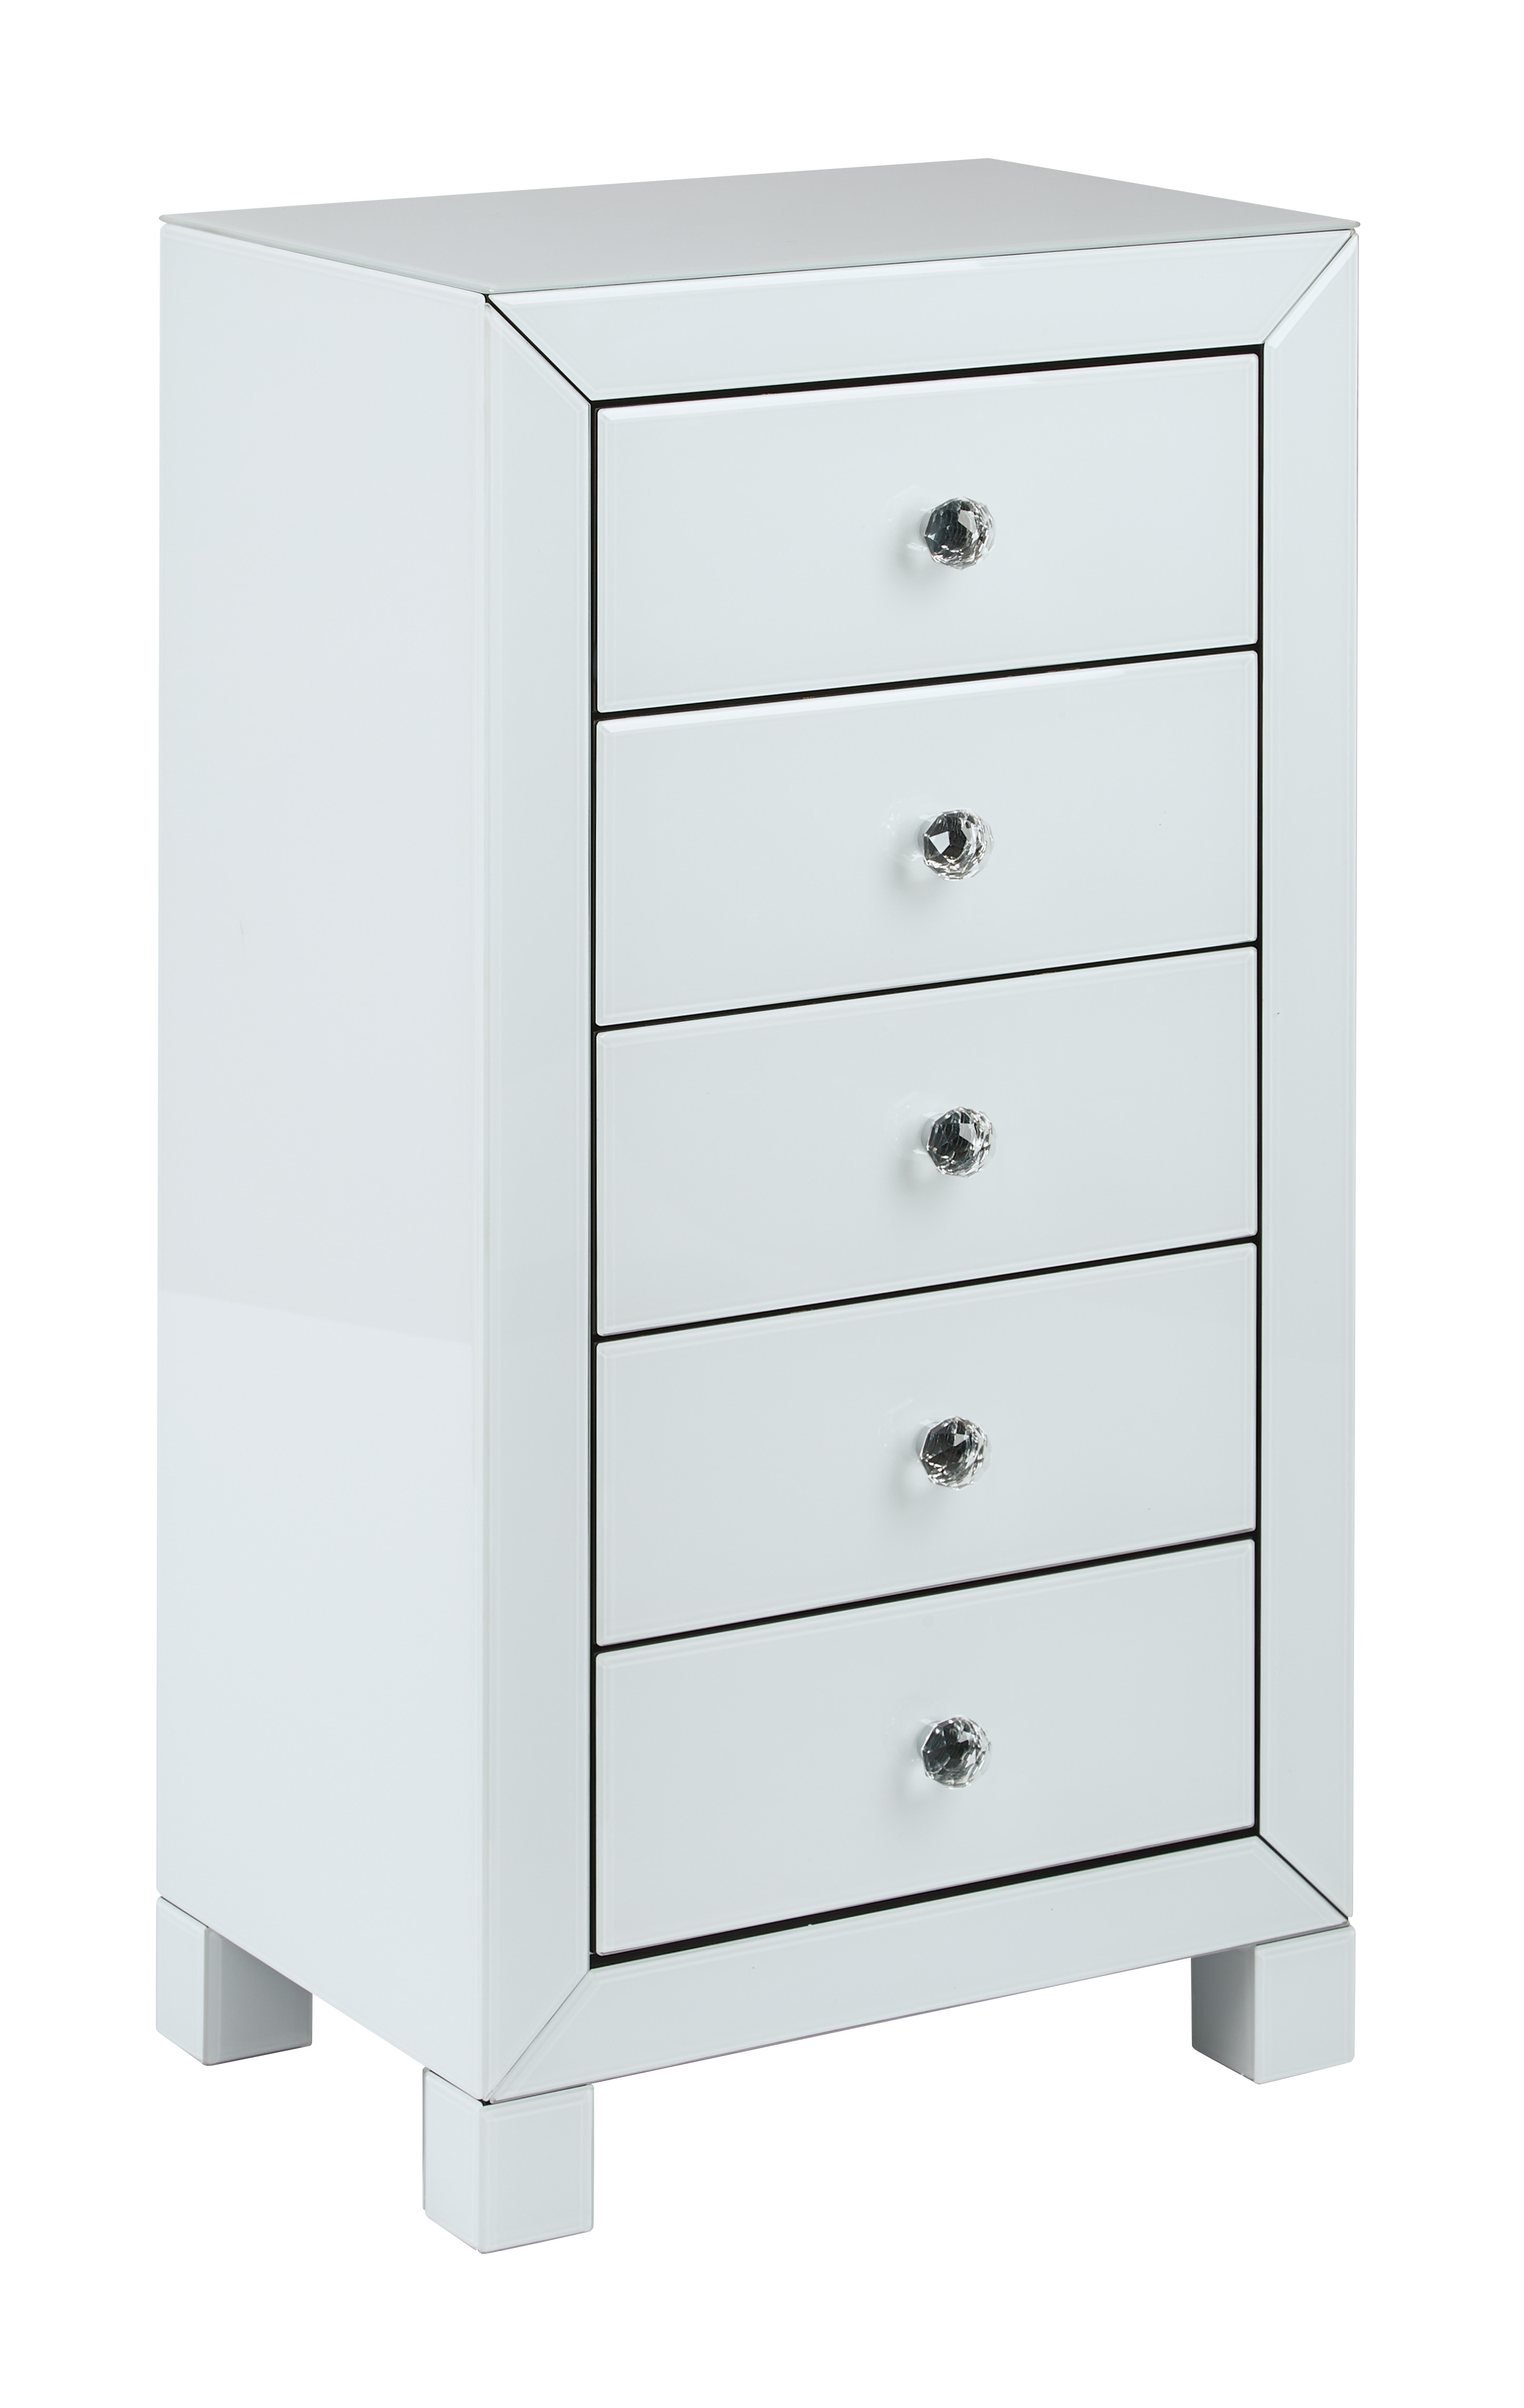 Avenue Six Reflections 5 Drawer Accent Table with Black or White Glass Finish - Assembled